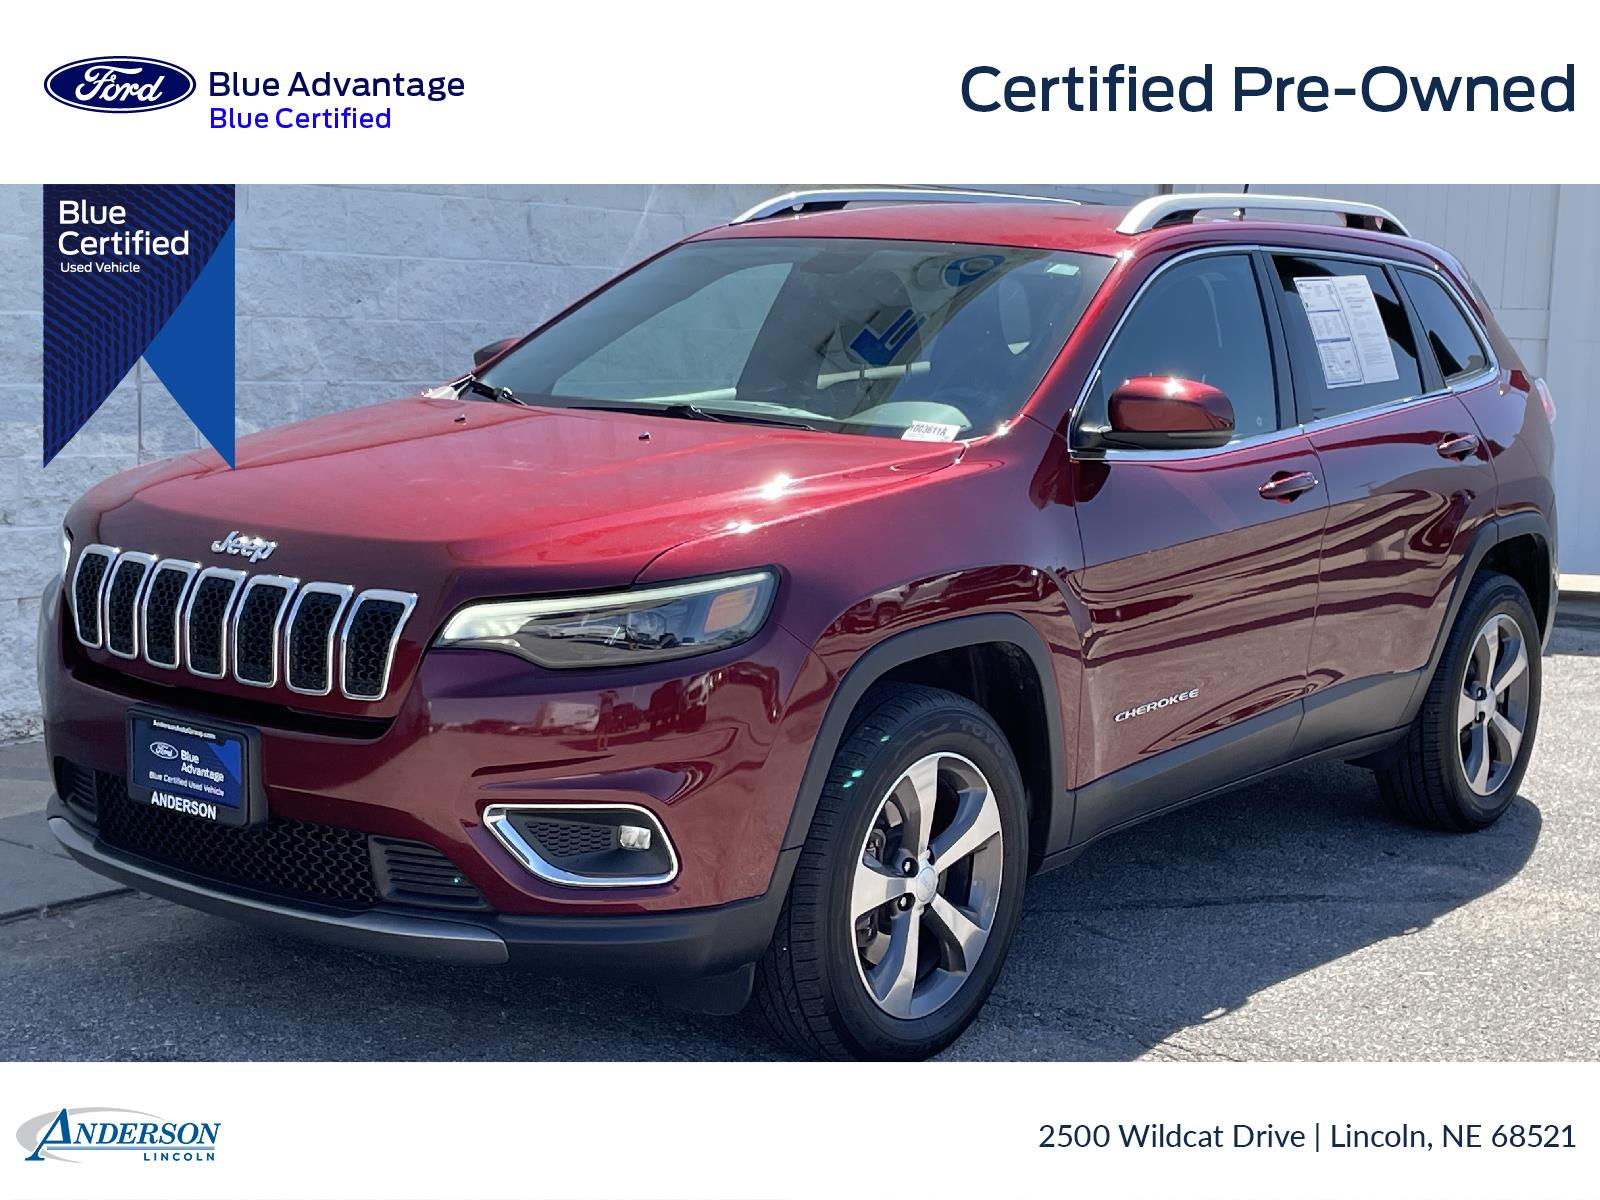 Used 2019 Jeep Cherokee Limited Stock: 1003611A